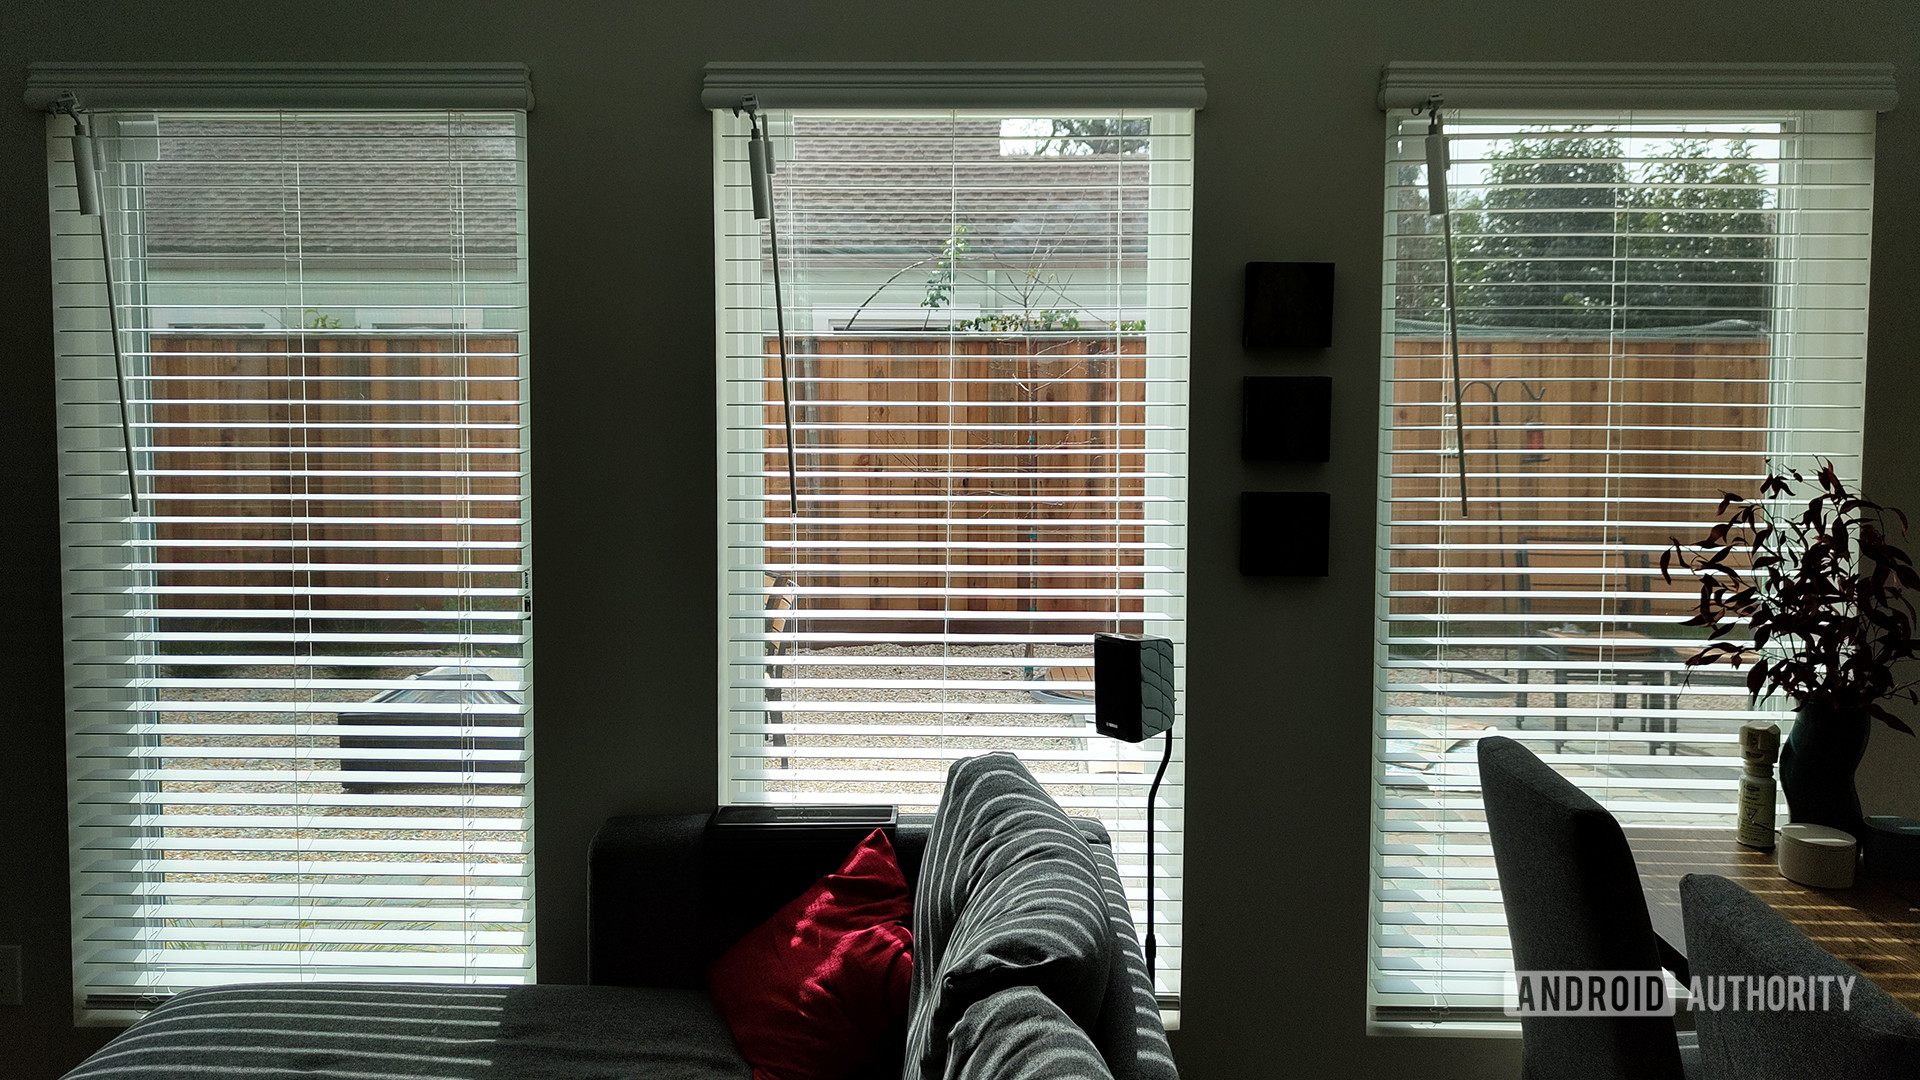 I retrofitted my blinds to make them smart, and it’s been awesome